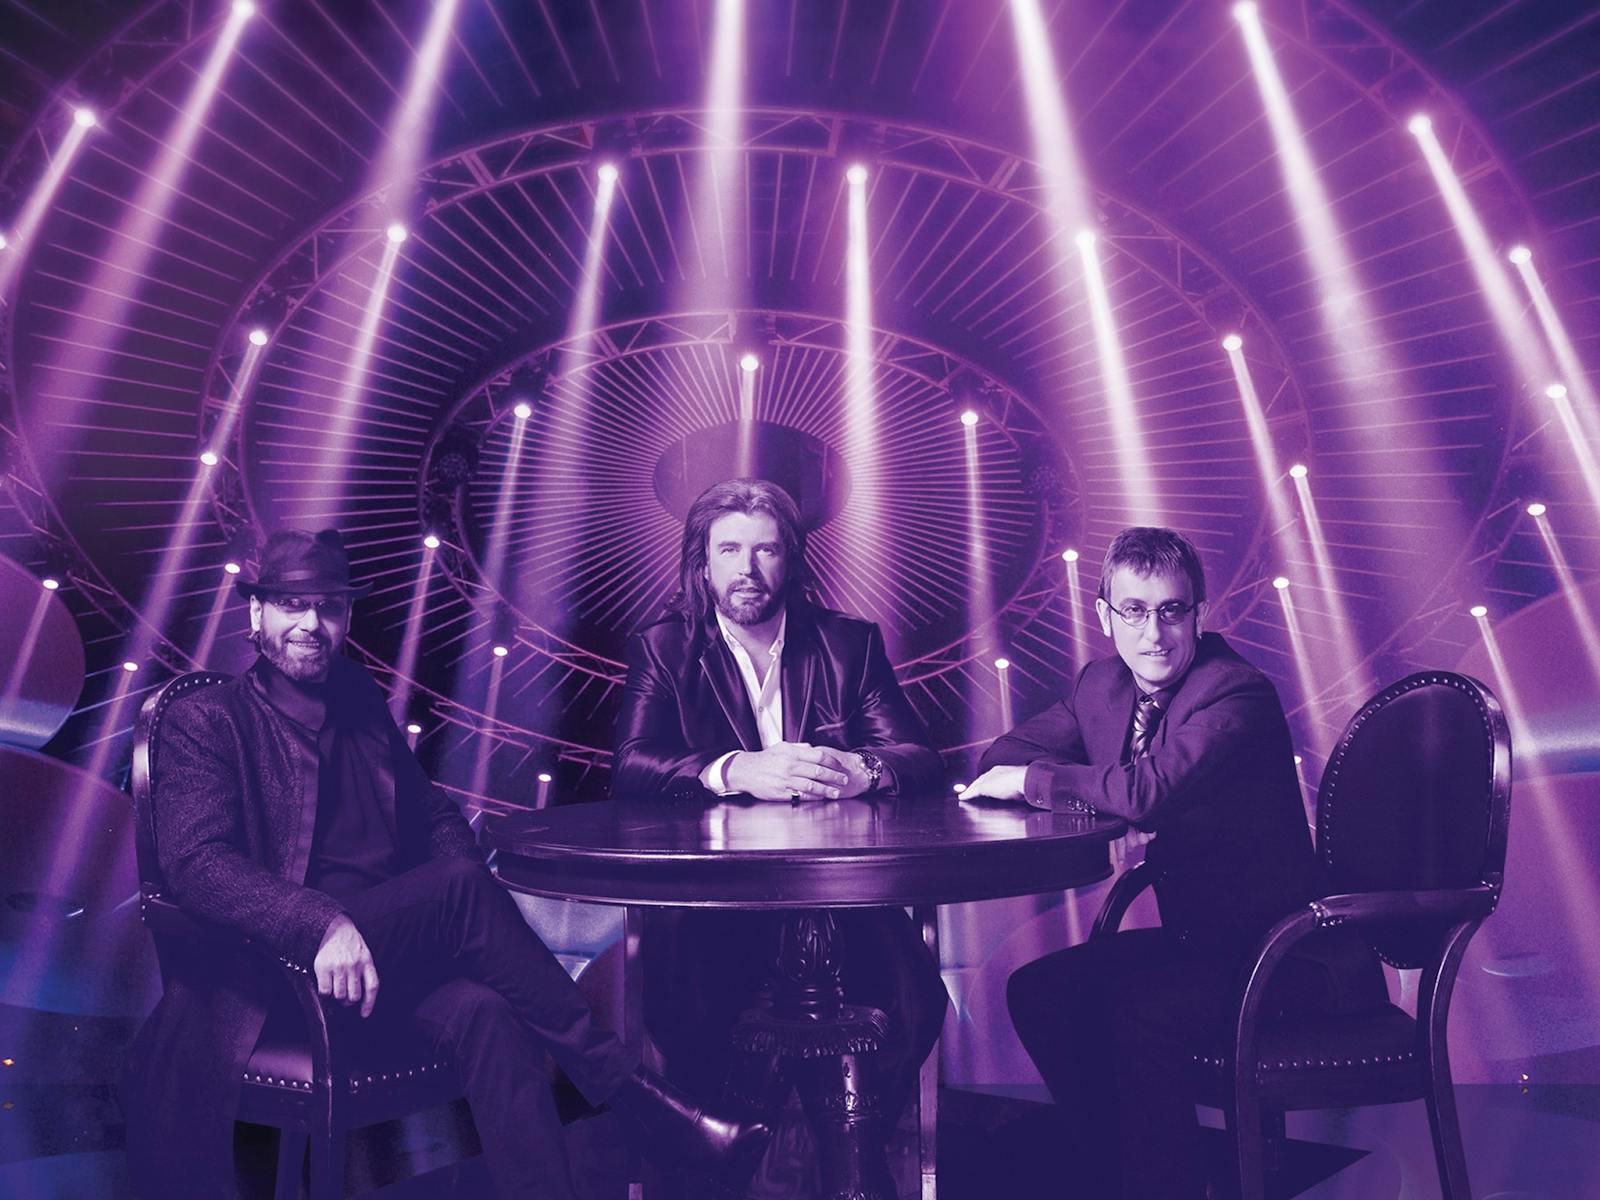 Image for The Australian Bee Gees Show - 25th Anniversary Tour - Frenchs Forest